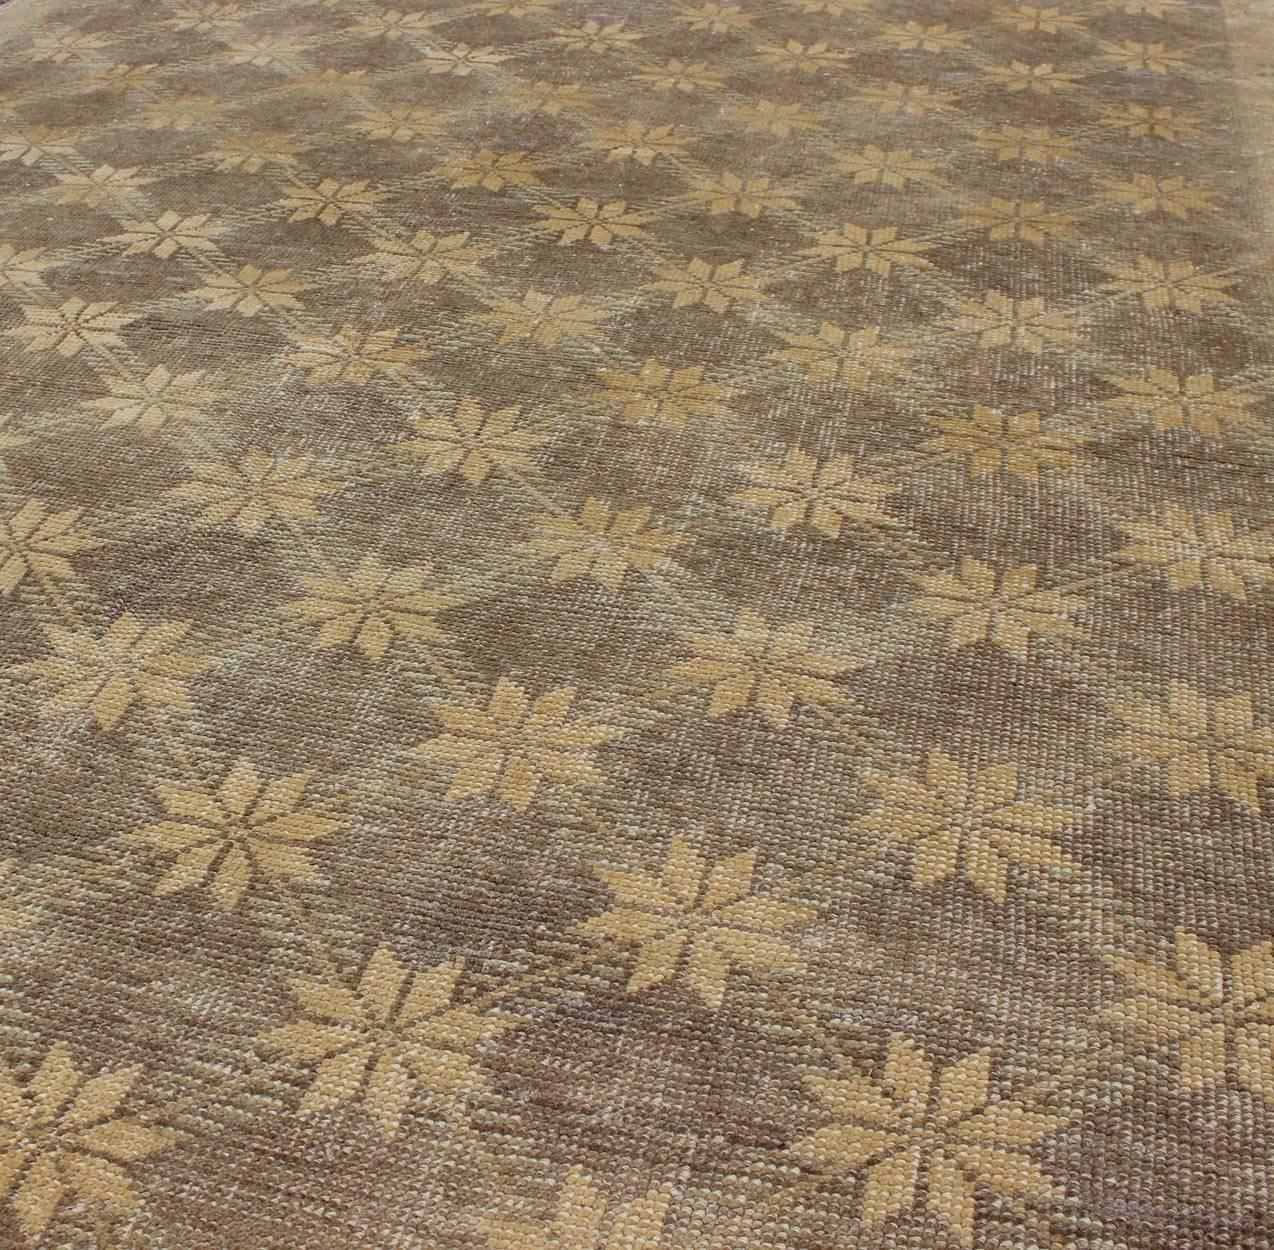 20th Century Brown Midcentury Vintage Turkish Oushak Rug with Floral or Star Lattice Pattern For Sale